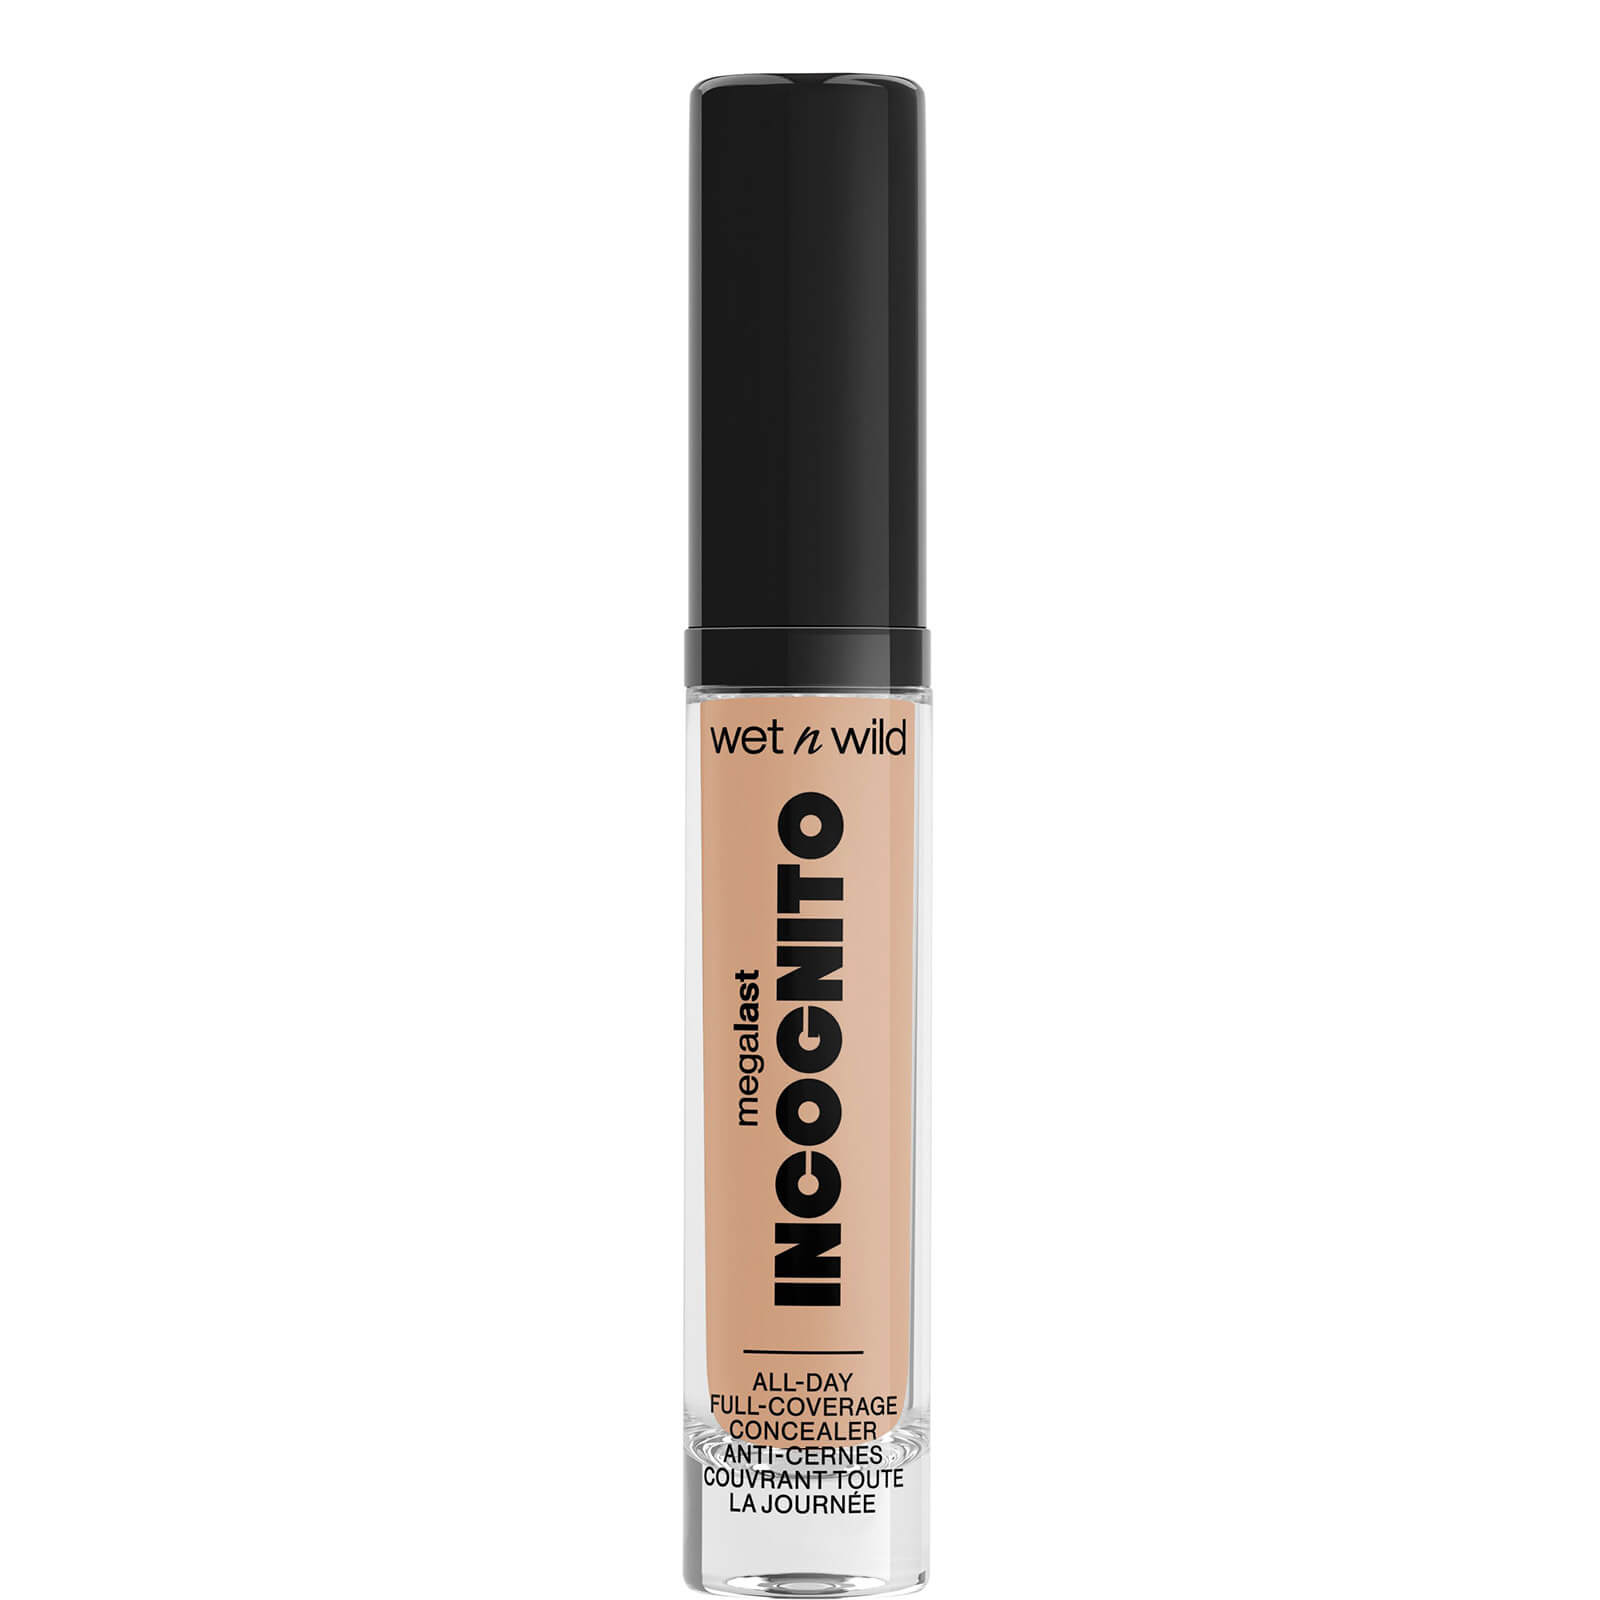 wet n wild Megalast Incognito Full-Coverage Concealer 5.5ml (Various Shades) - Medium Neutral